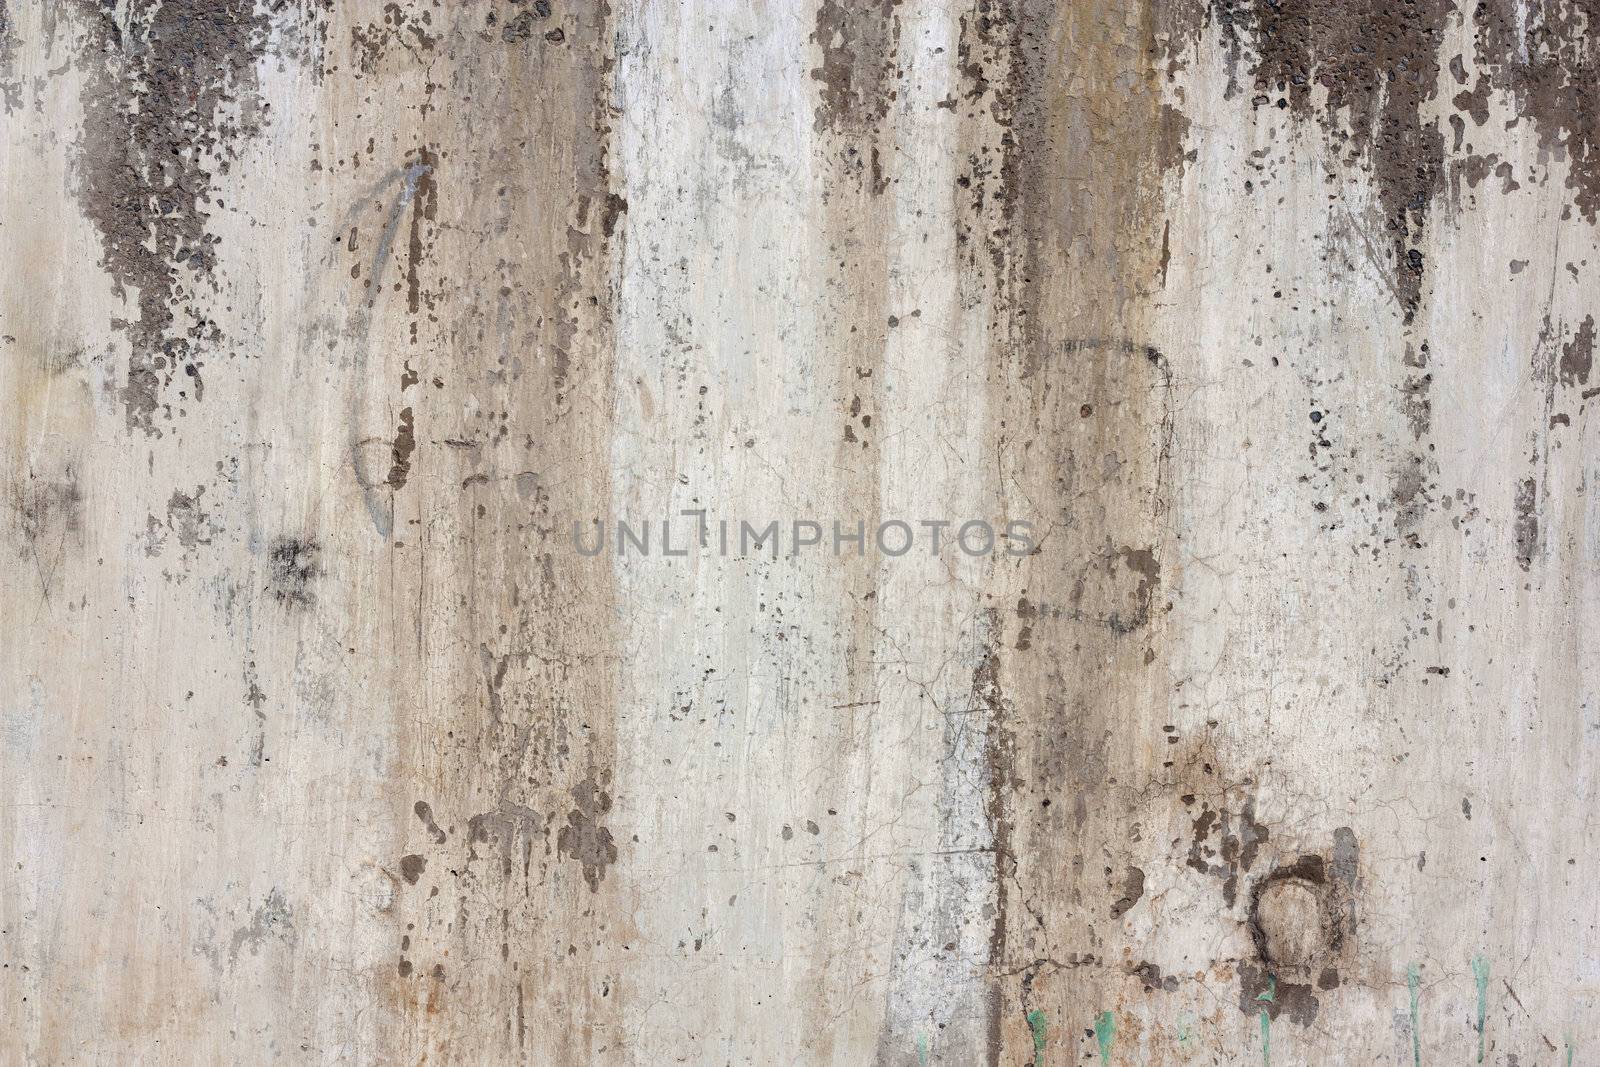 Grunge cement wall:can be used as background 